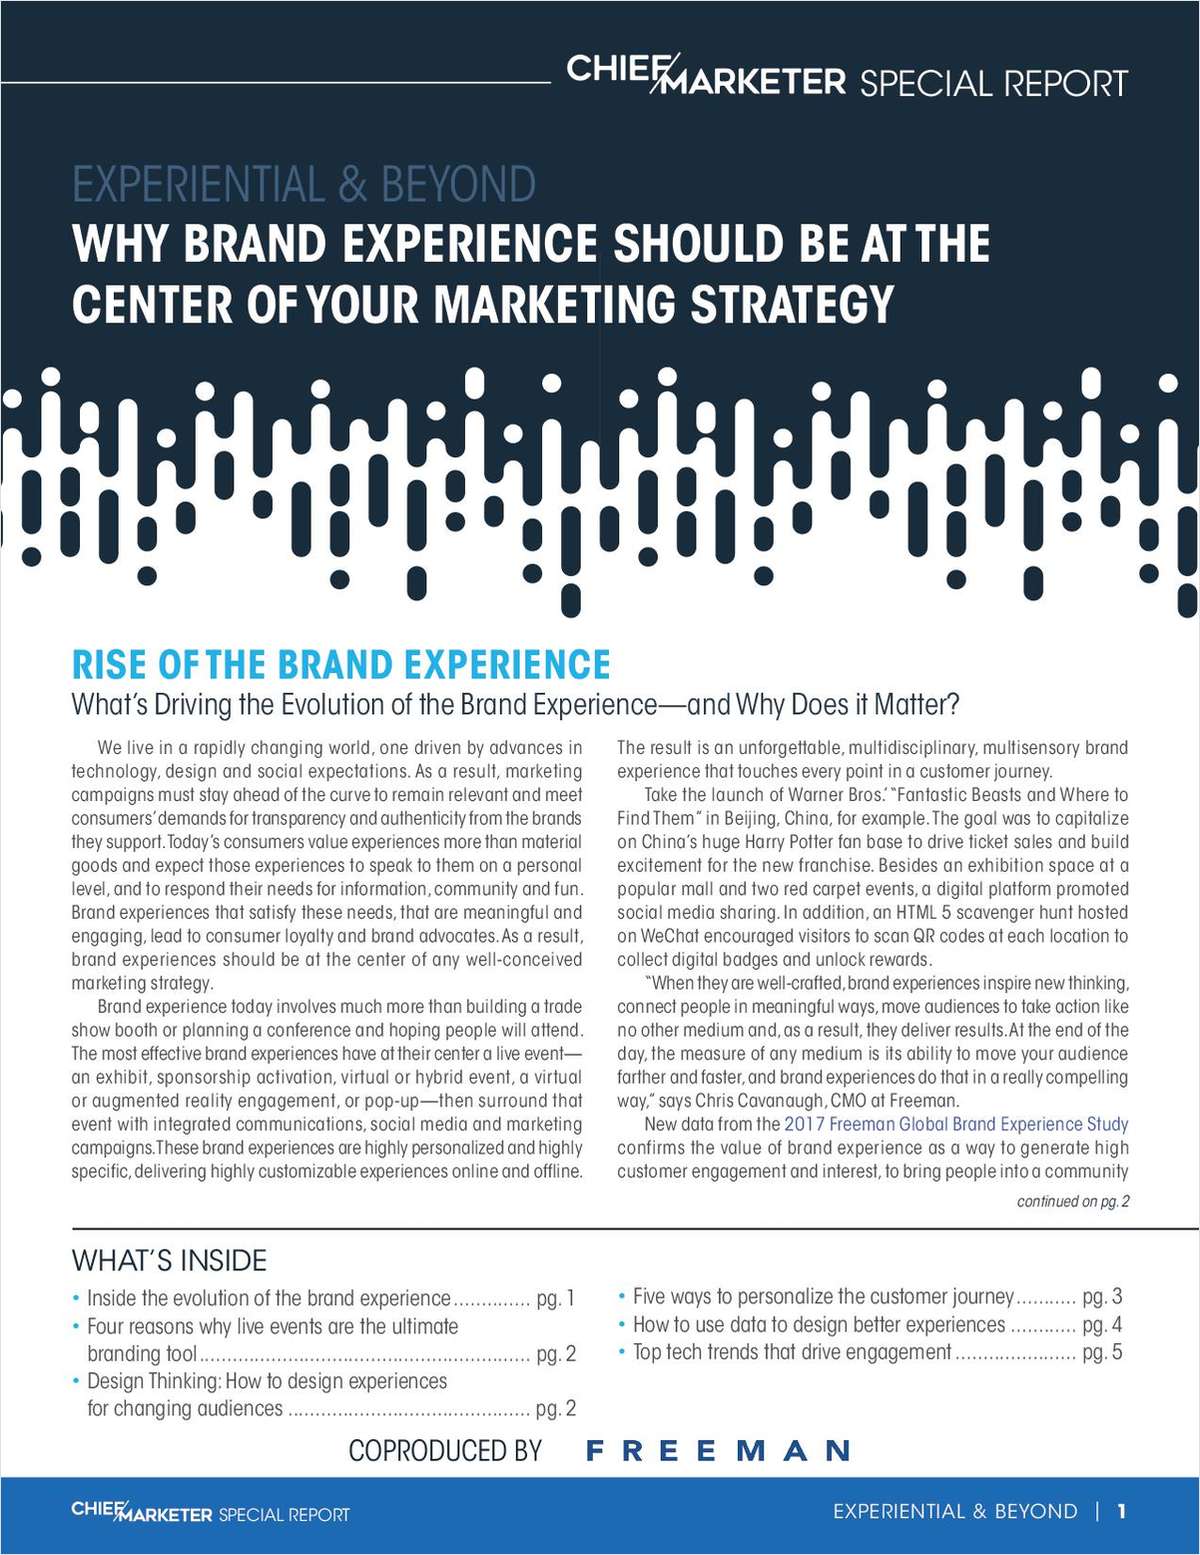 Why Brand Experience Should Be At The Center of Your Marketing Strategy